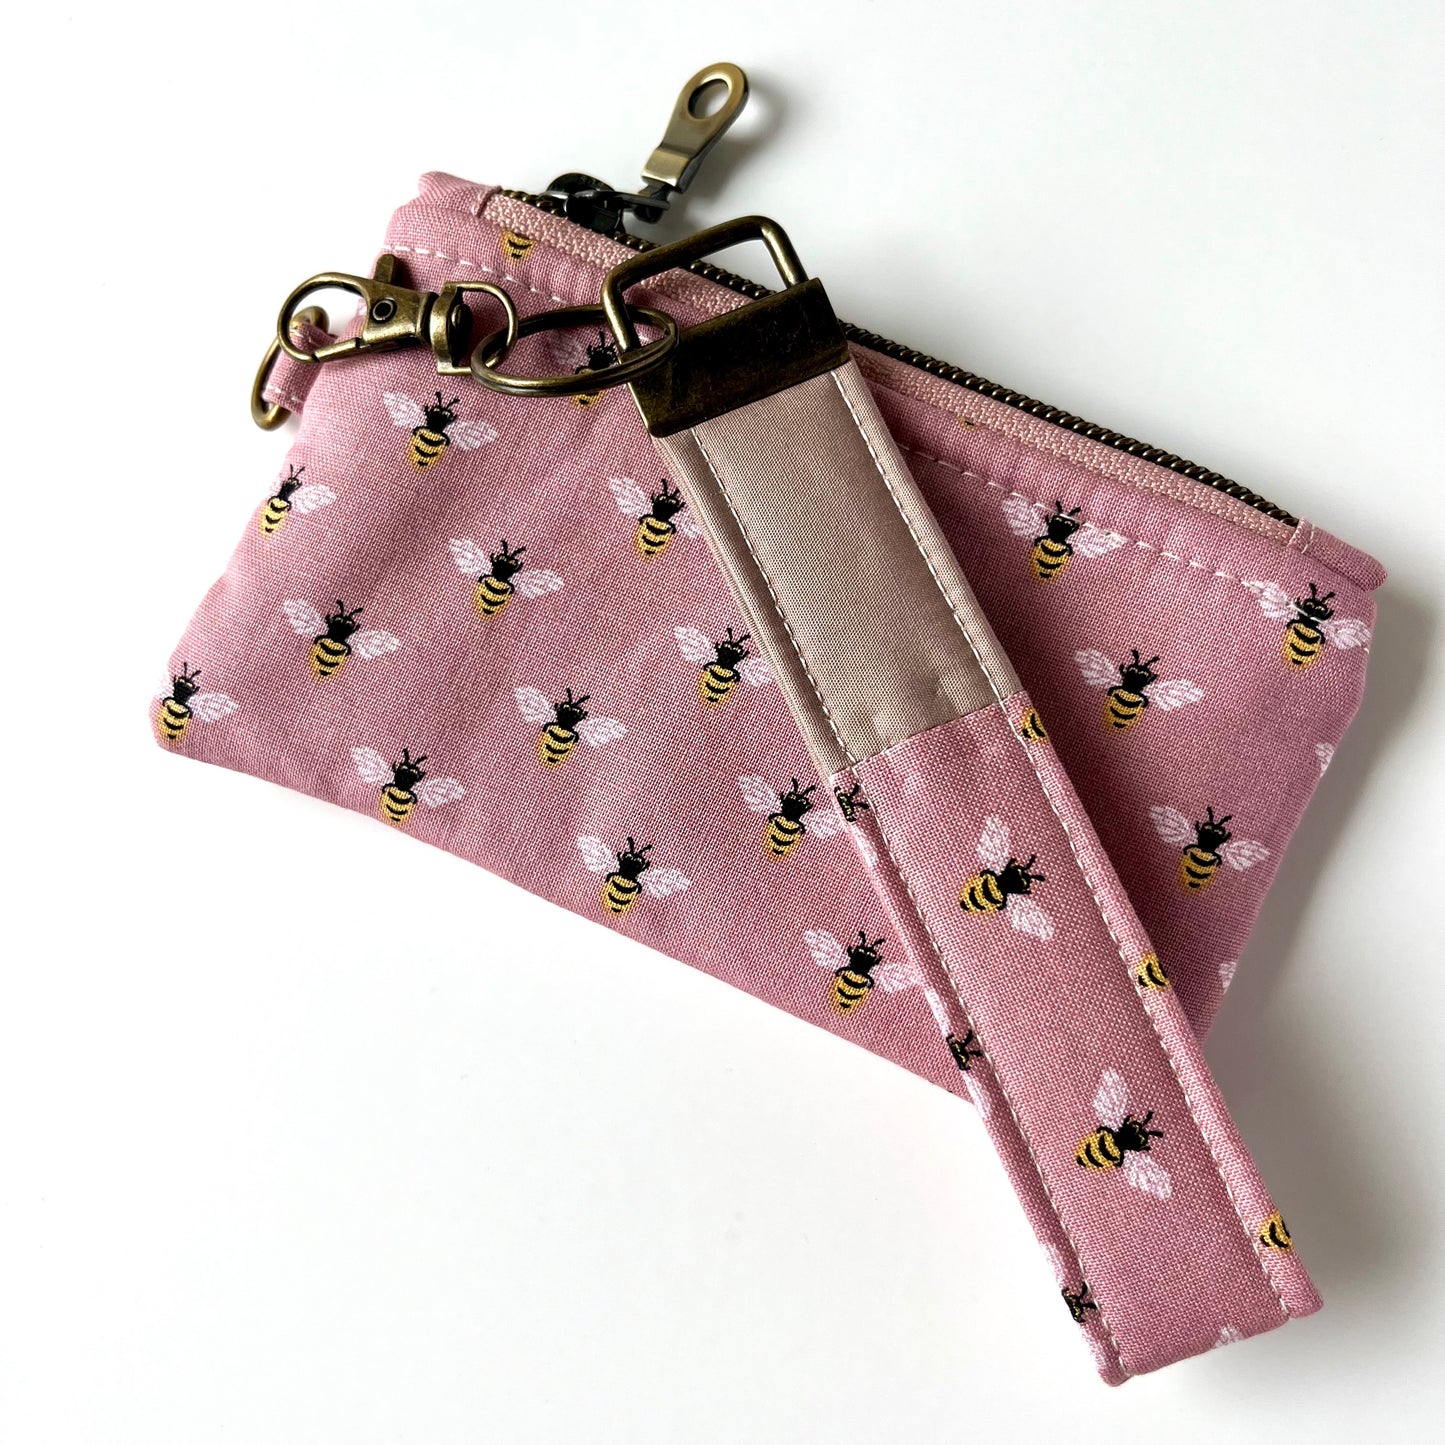 The Mini Pouch | Bees